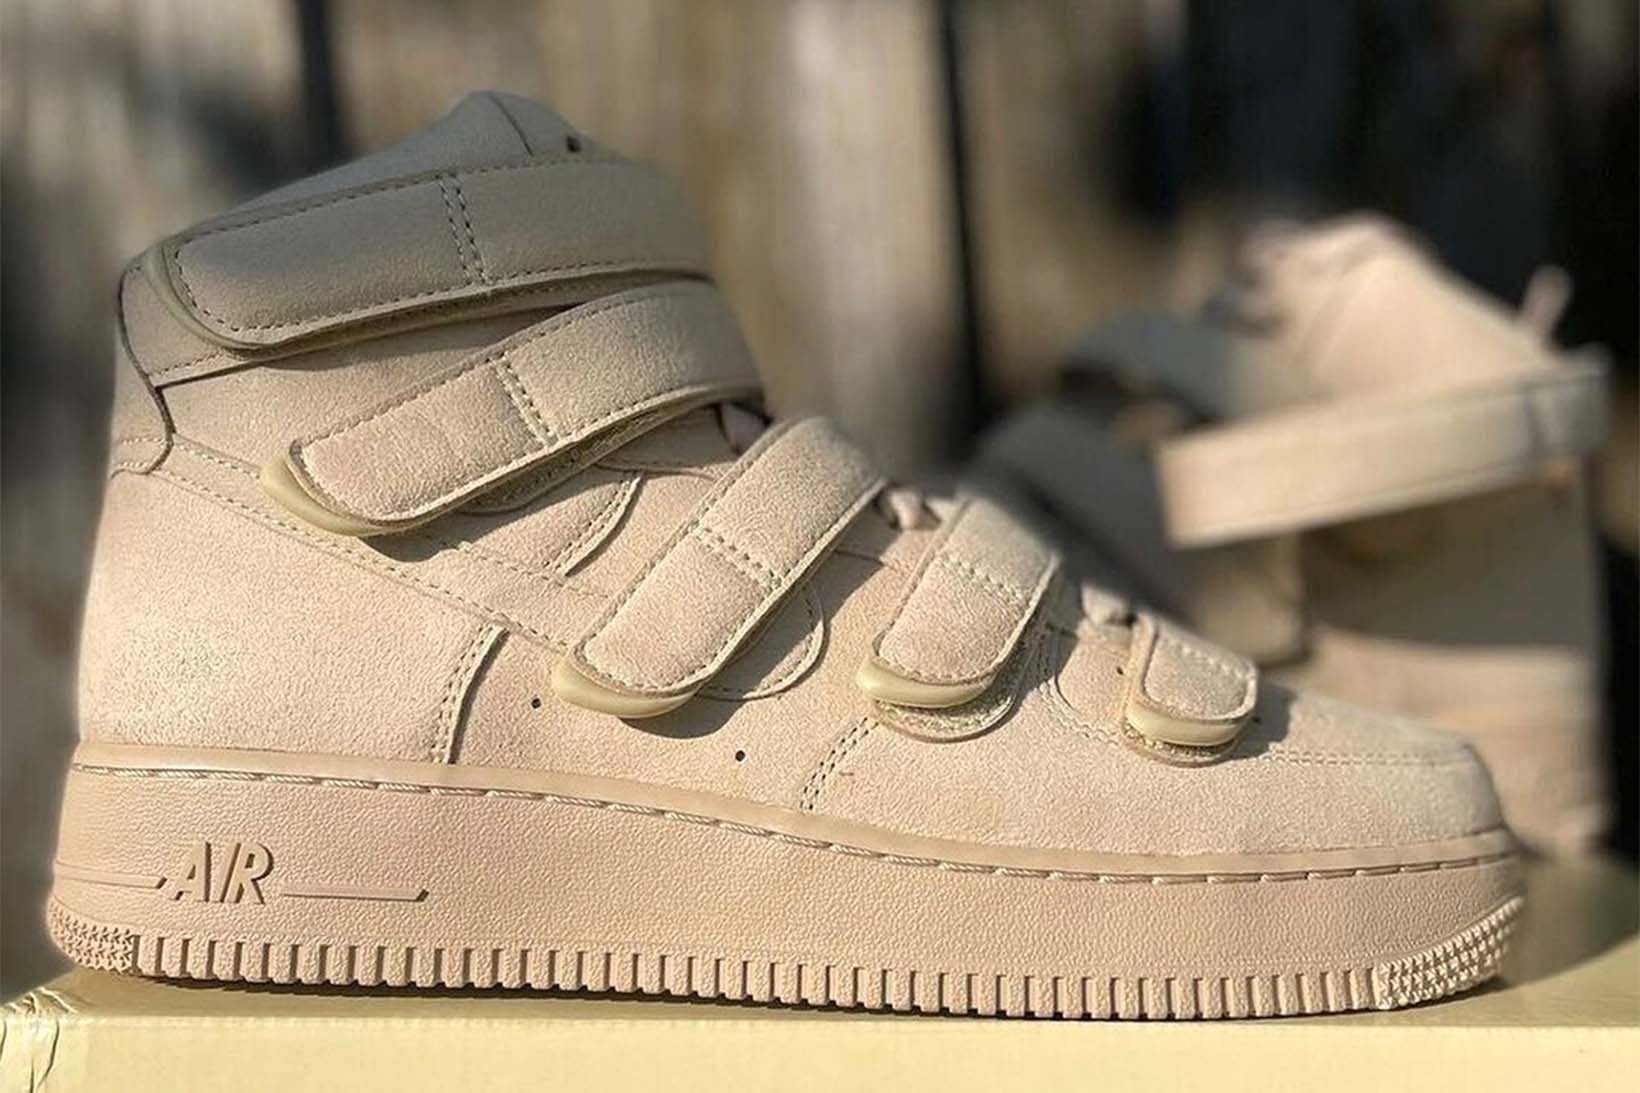 Billie Eilish x Nike Air Force 1 Collab: Release Date, Pricing